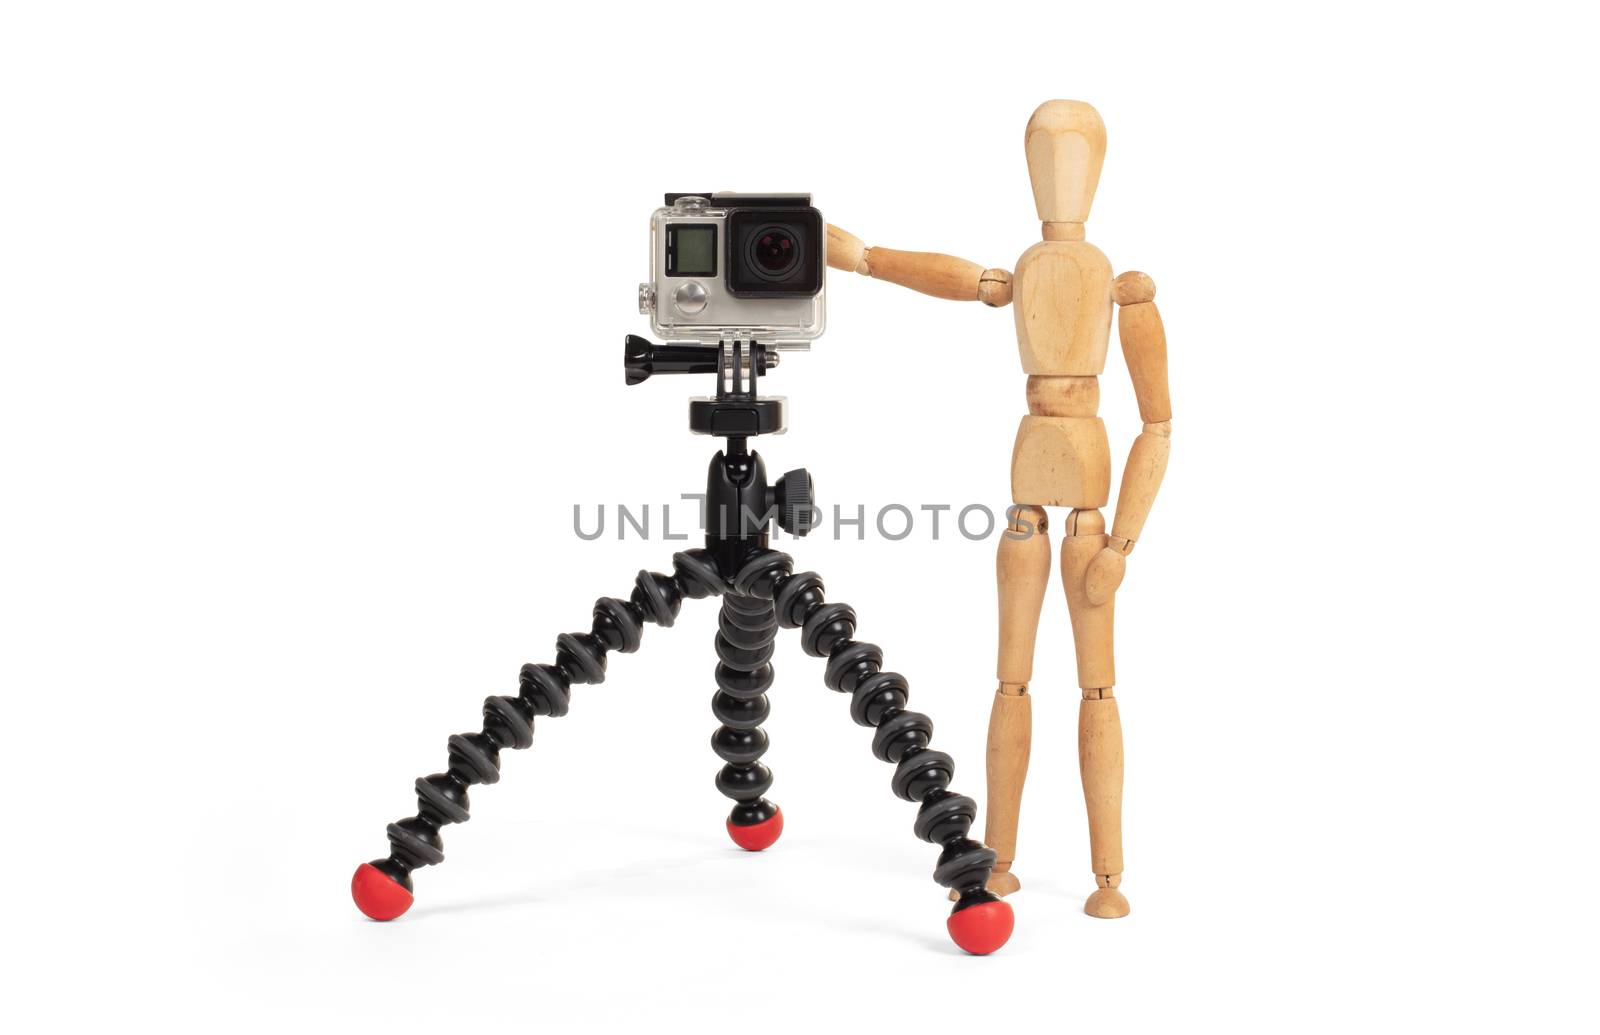 Wooden dummy standing trying to make a video or photo by michaklootwijk